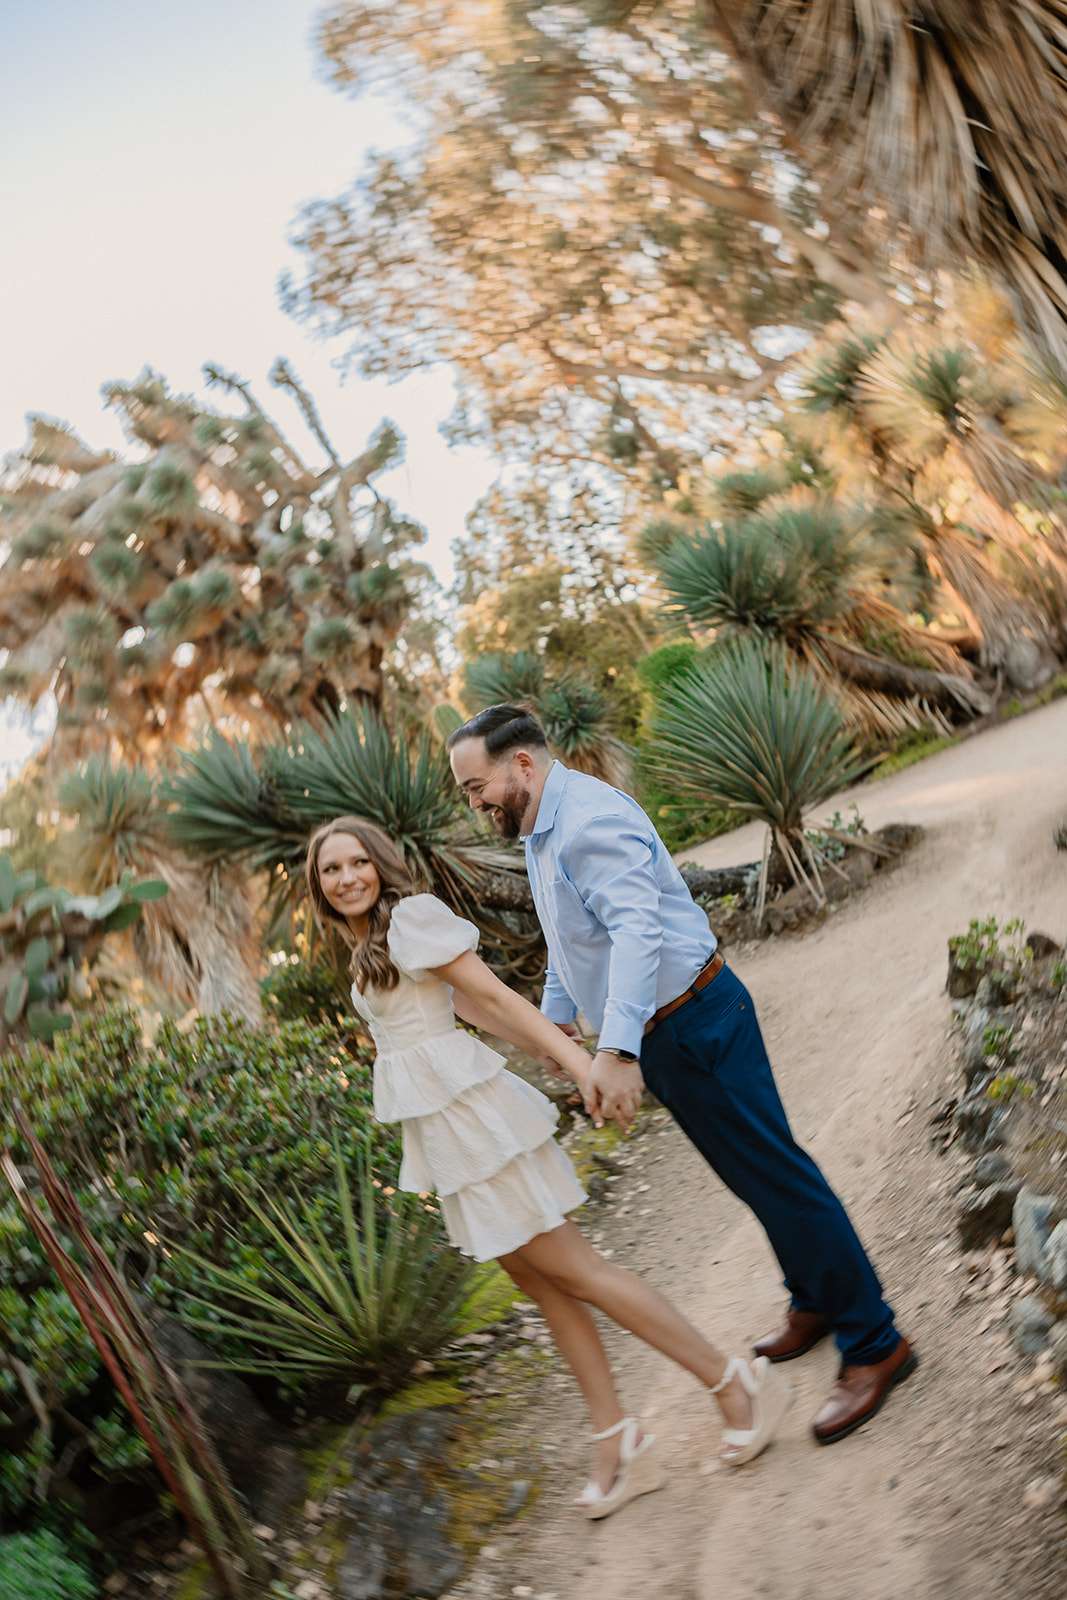 A couple embraces on a dirt path surrounded by lush greenery and various plants. The woman wears a white dress and lifts one leg, while the man wears a blue shirt and dark pants  at cactus garden in stanford